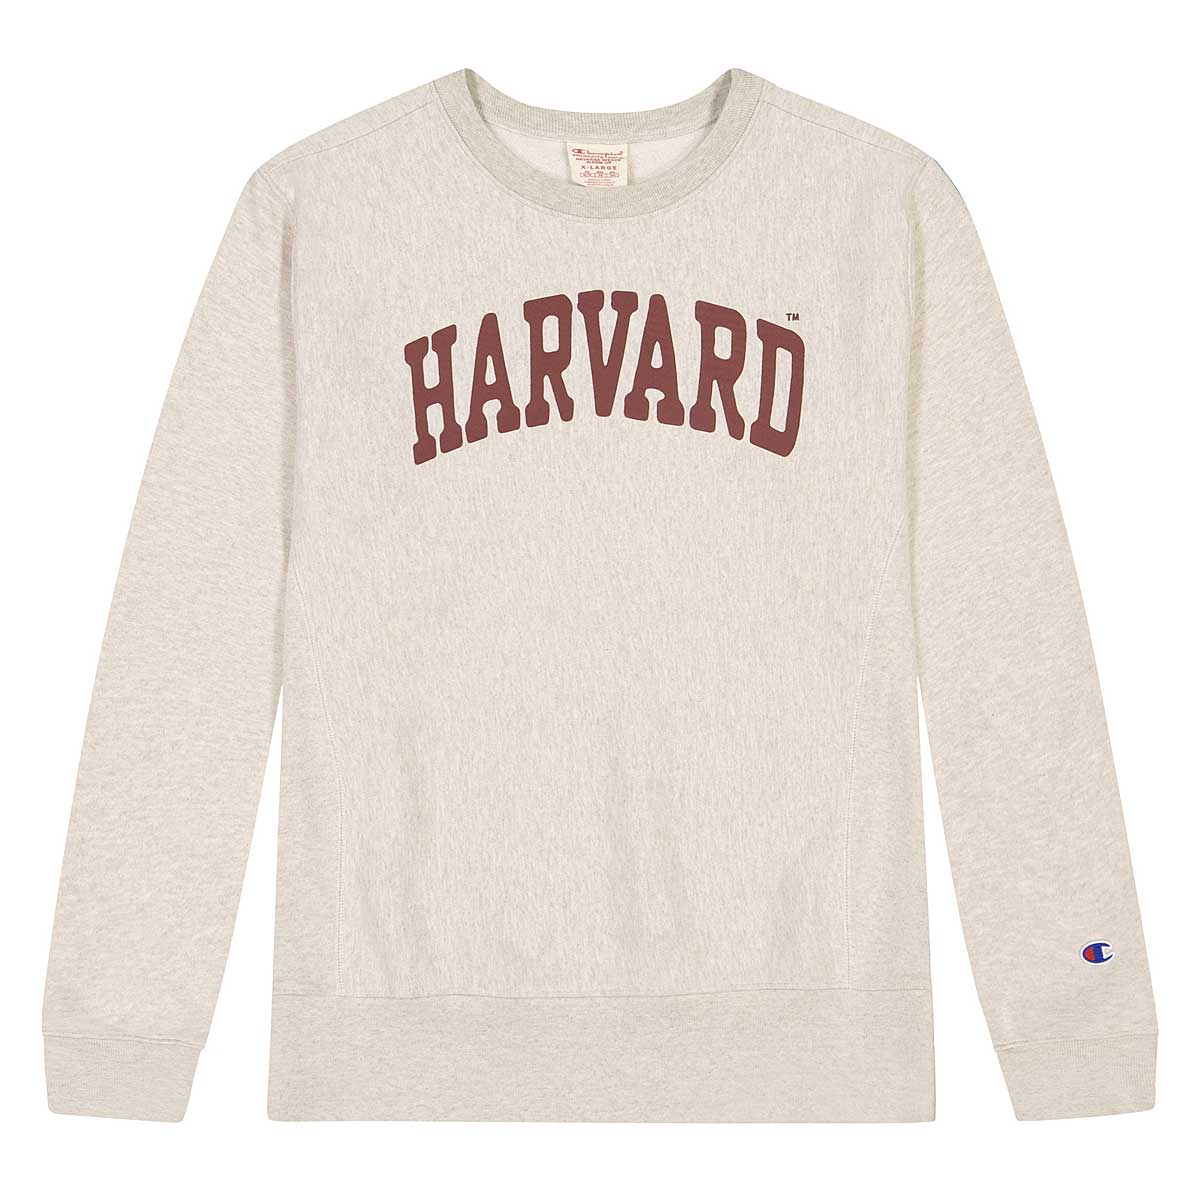 Champion Reverse Weave Ncaa Harvard Authentic College Crewneck, Oatmeal Melange Top Dyed